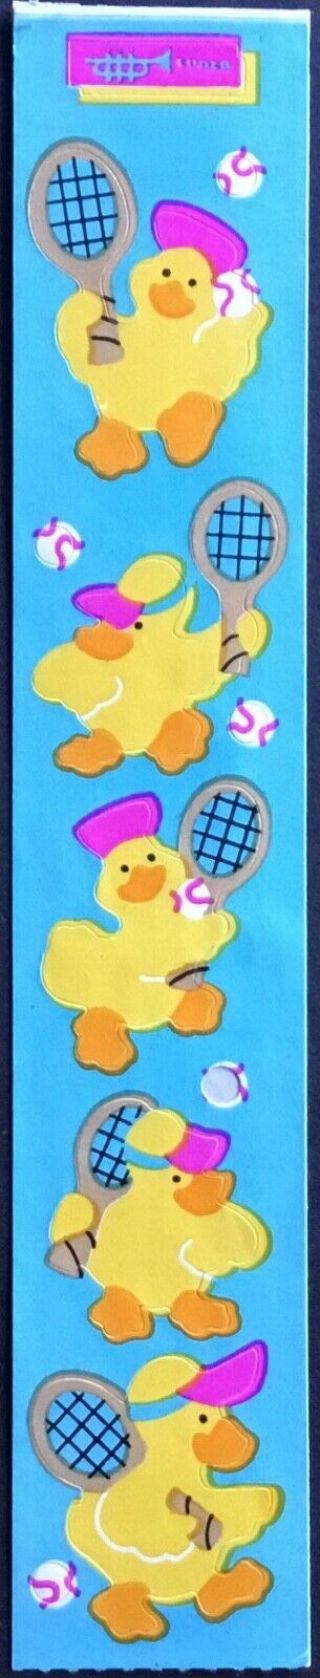 Vintage Stickers - Cardesign - Toots - Tennis Anyone? - Dated 1983